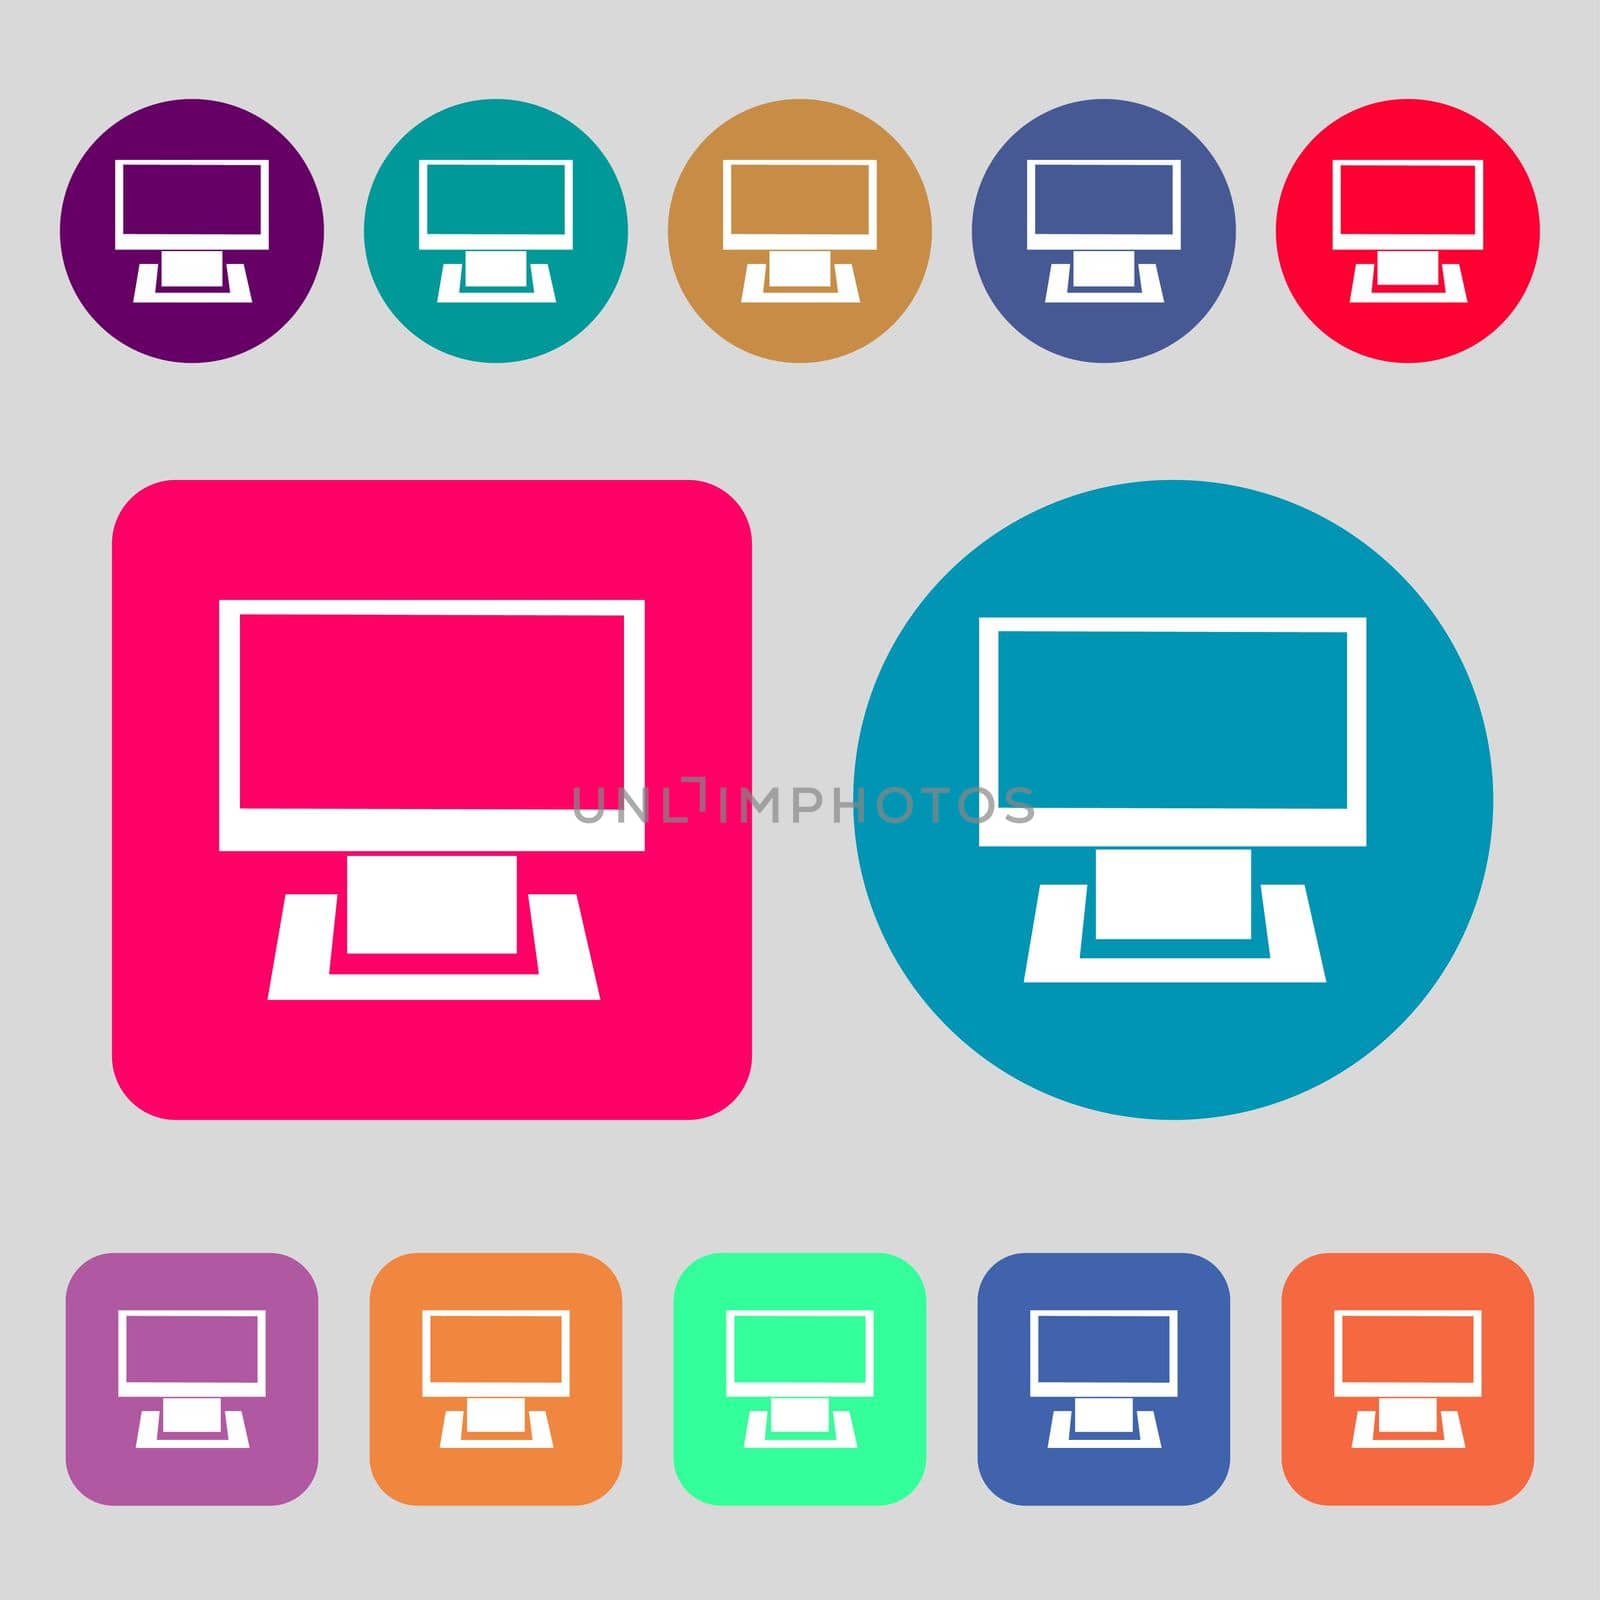 Computer widescreen monitor sign icon.12 colored buttons. Flat design. illustration